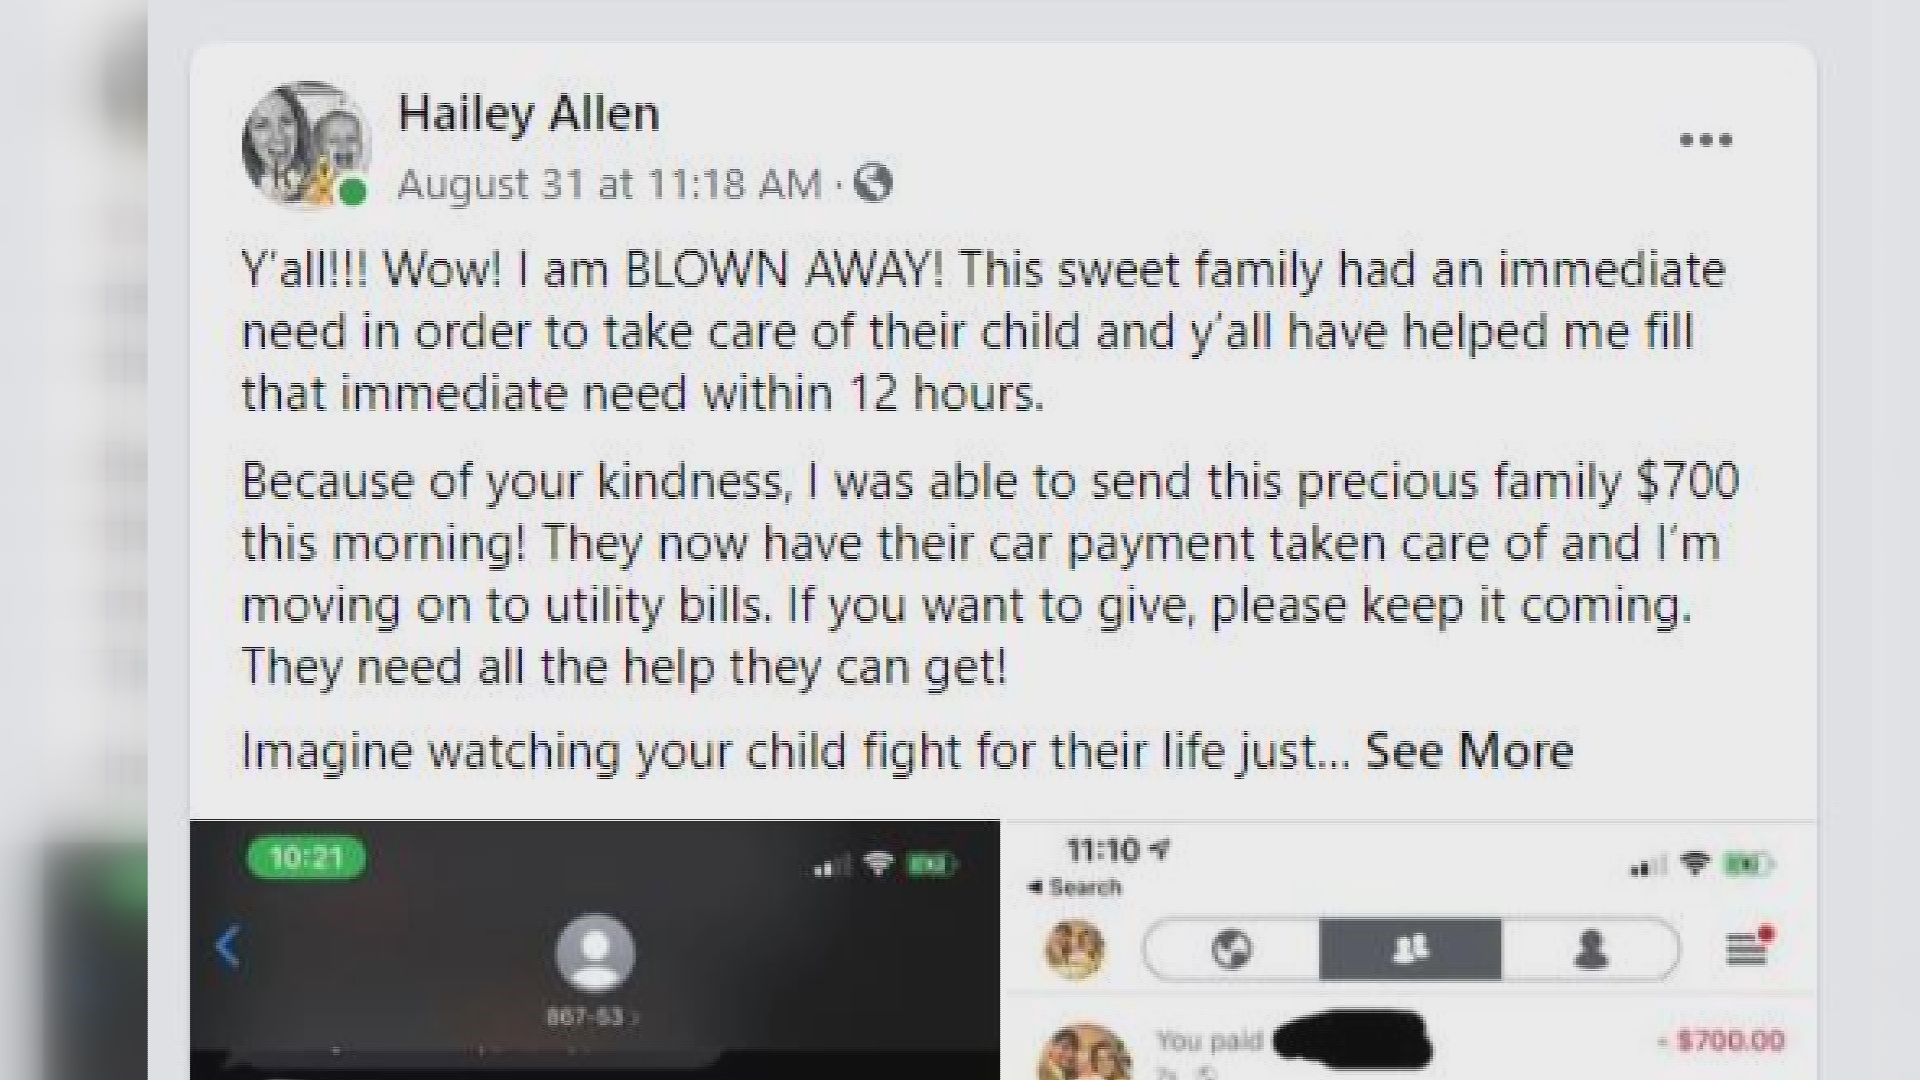 A Warner Robins family with their own childhood cancer battle wants to help another family going through some of the same struggles.